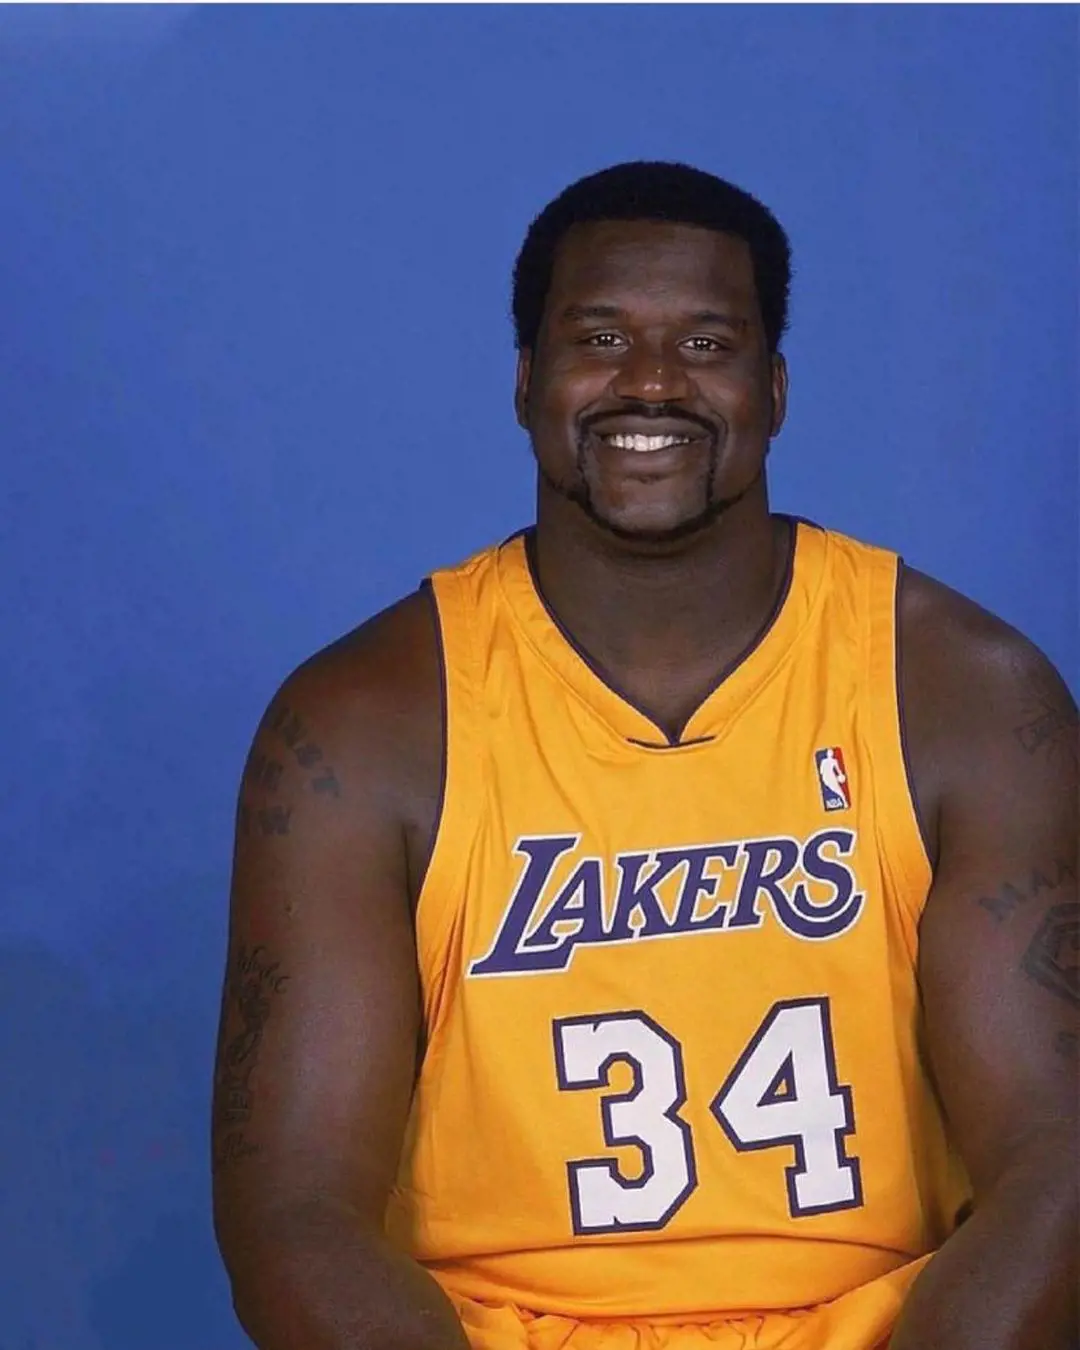 Shaq once had a head full of hair during early NBA days